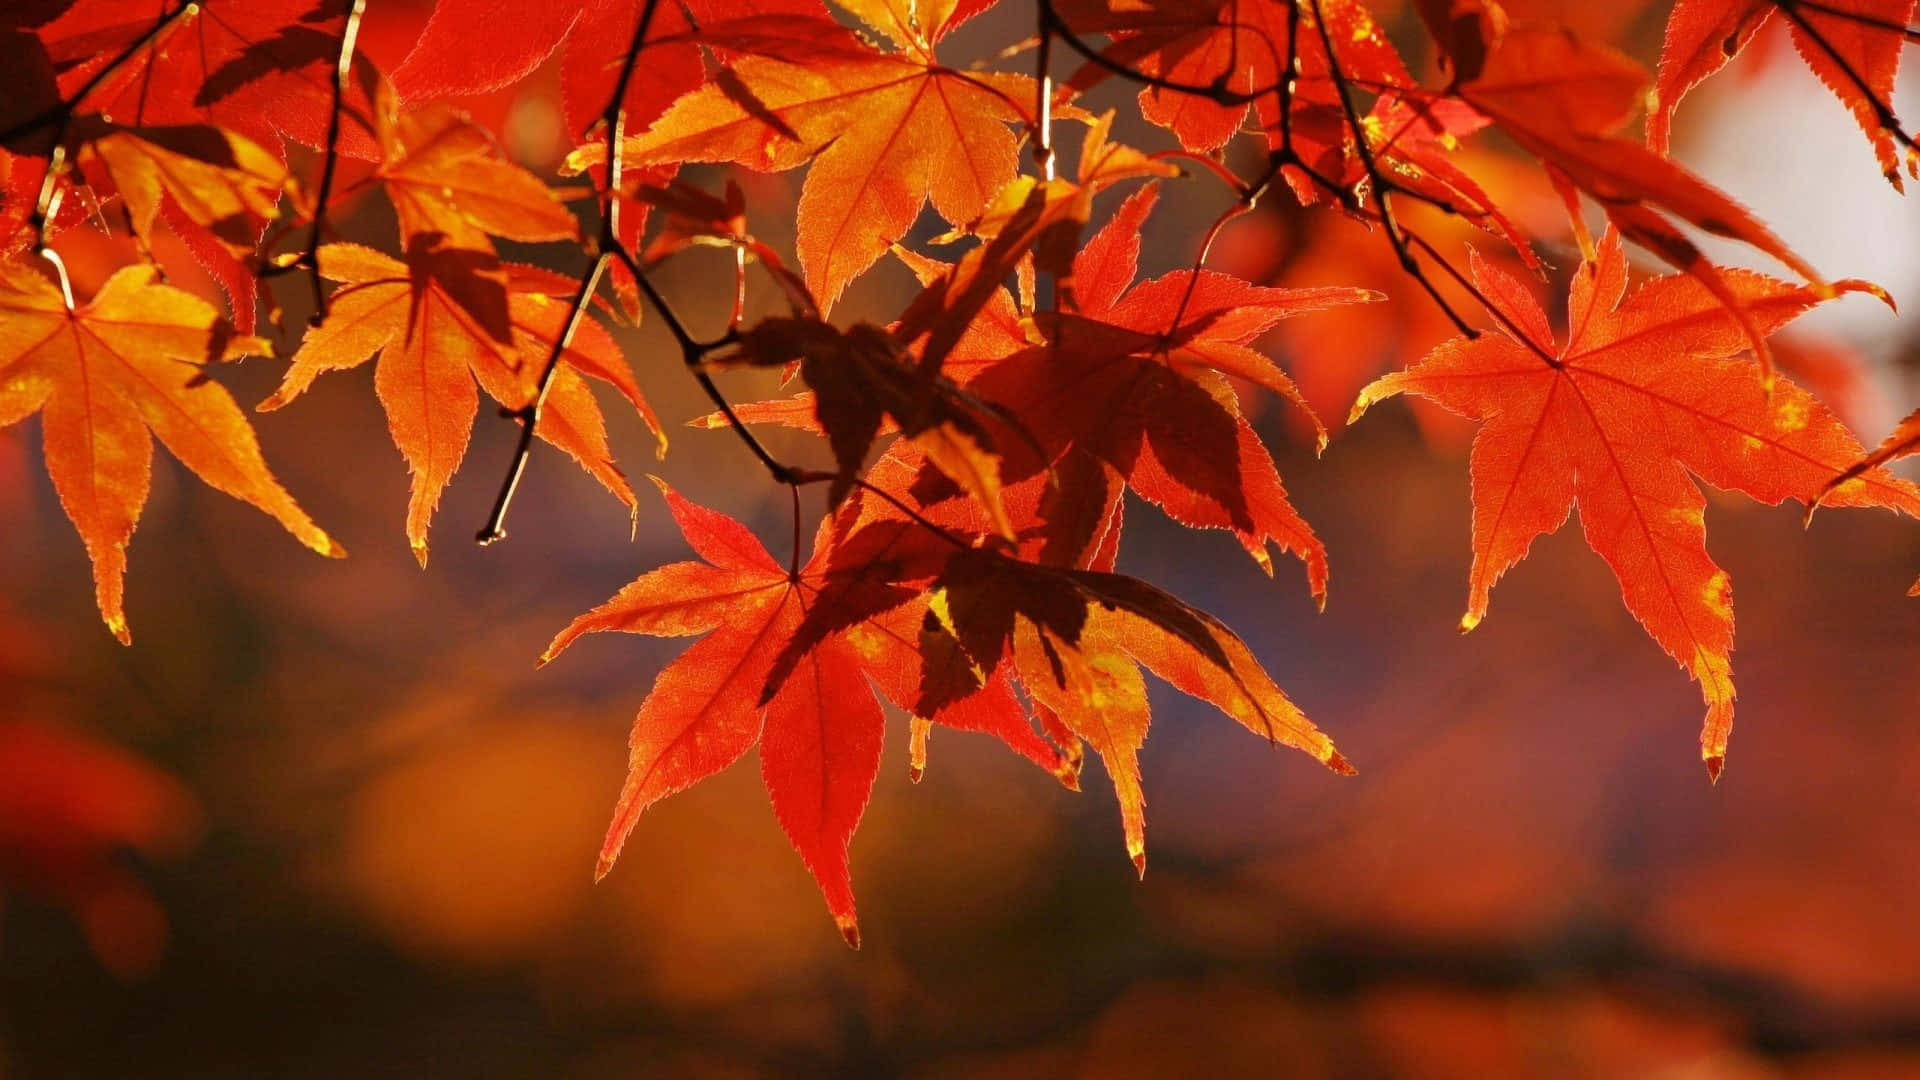 Download #Fall Colors Background in High-definition | Wallpapers.com